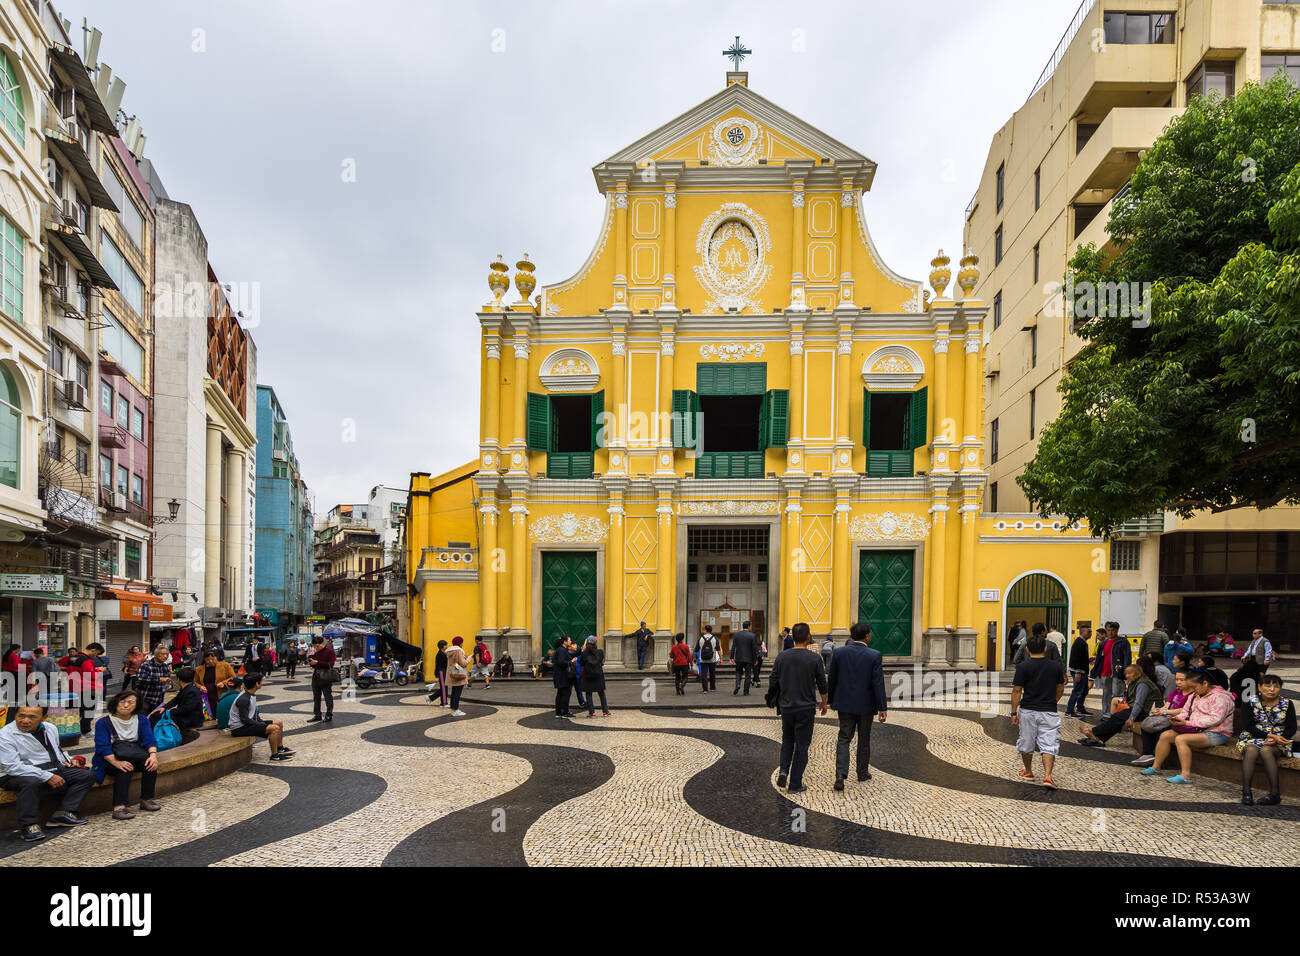 St. Dominic's Church is the oldest church in Macau, built in 16th century. It's part of the historic centre of Macau, UNESCO World Heritage Site Stock Photo